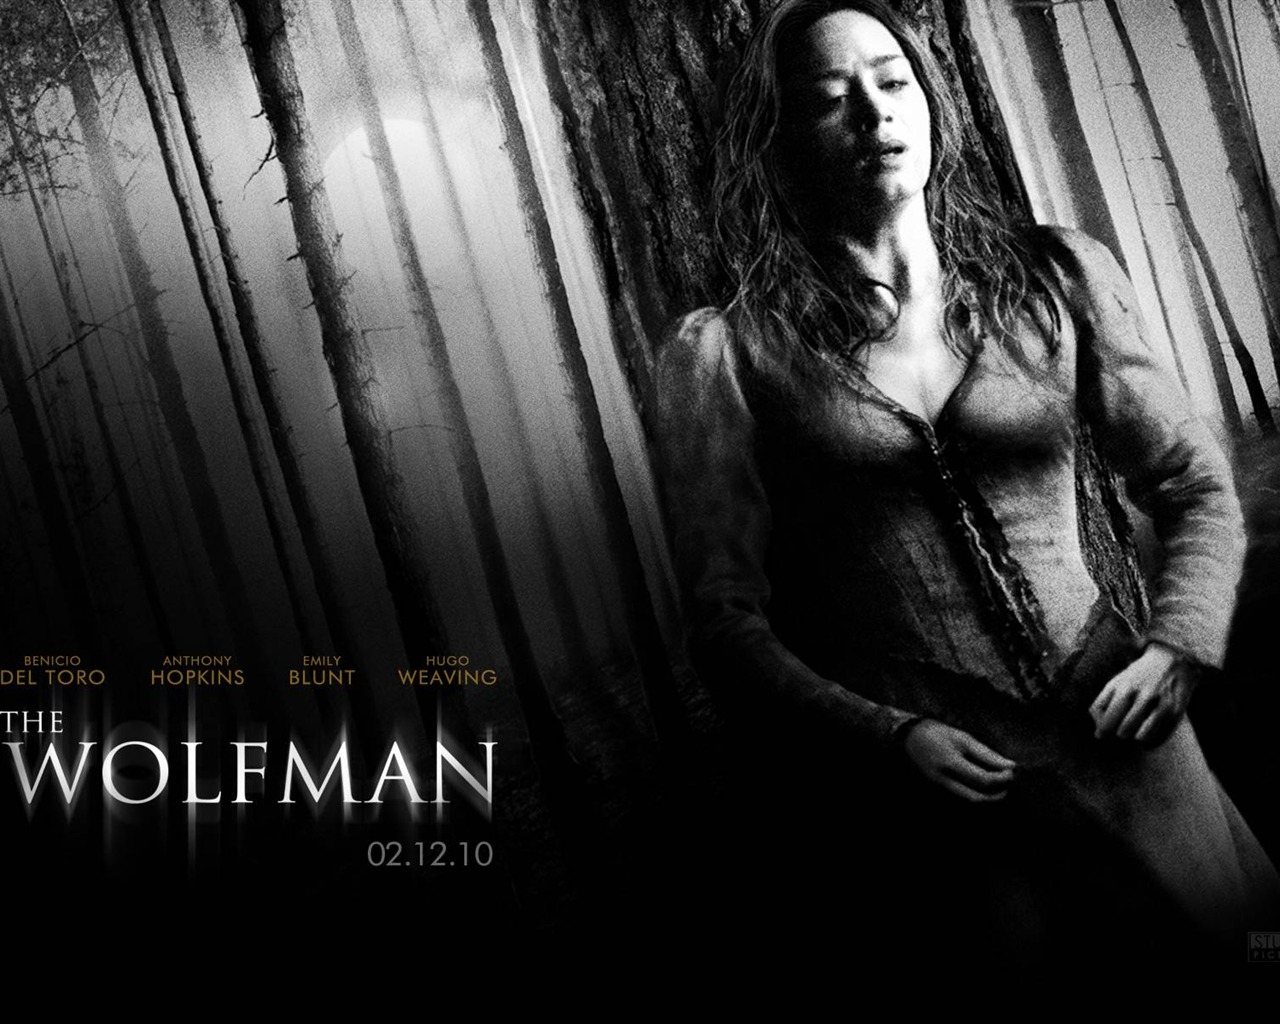 The Wolfman Movie Wallpapers #10 - 1280x1024